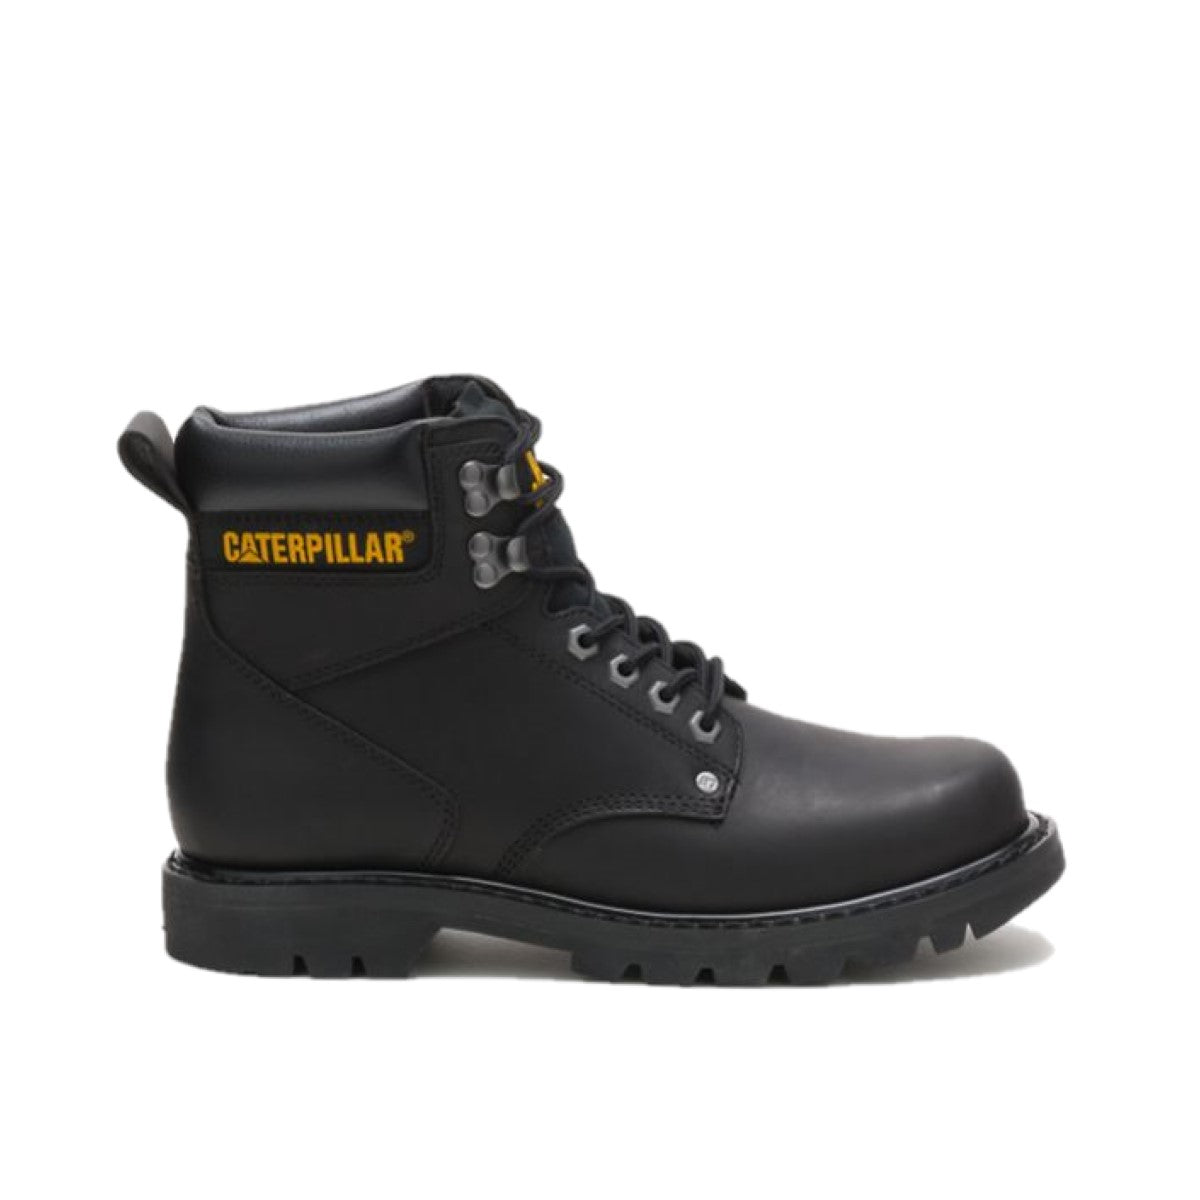 CATERPILLAR P70043-W SECOND SHIFT MN'S (Wide) Black Leather Work Boots